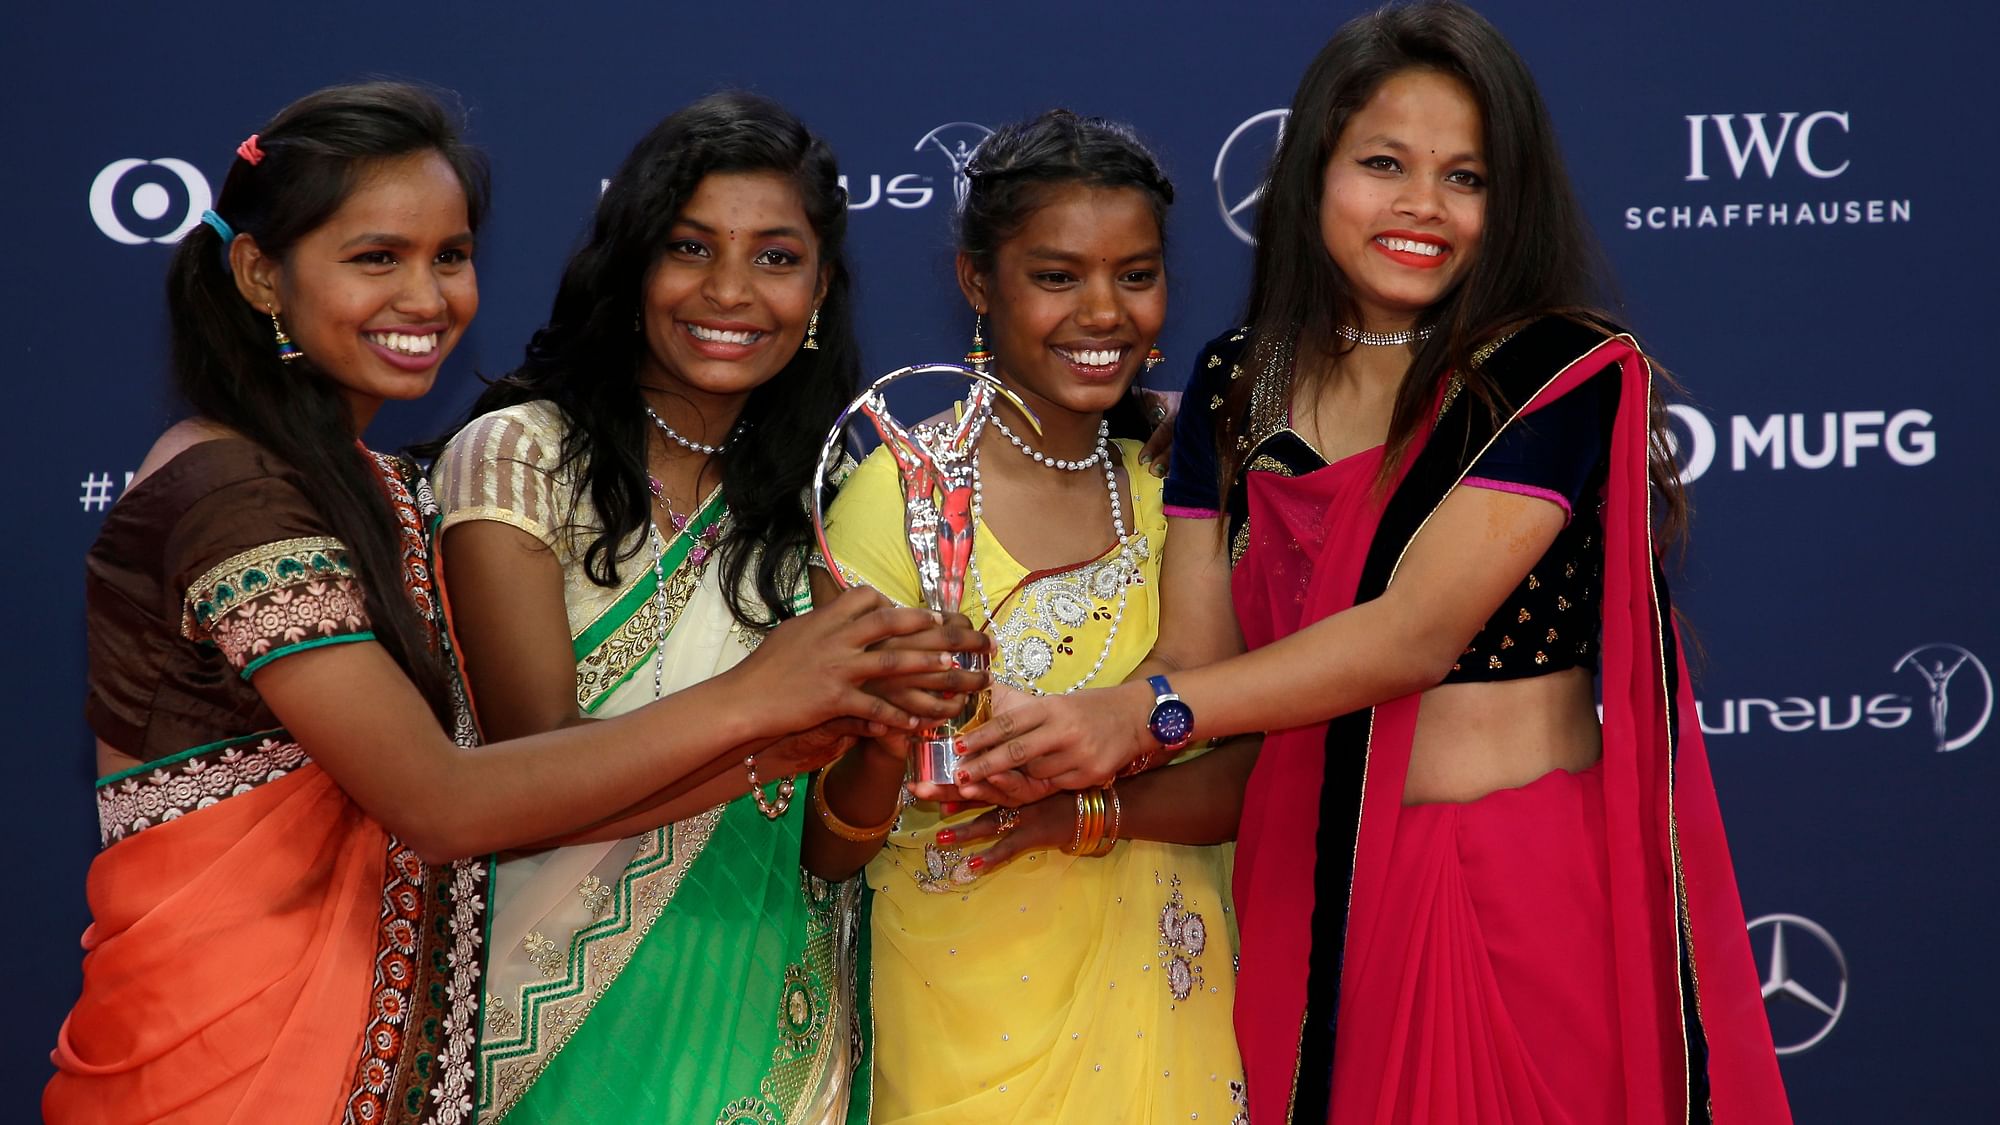 Jharkhand-based NGO Yuwa bagged the Sport for Good prize at the Laureus World Sports Awards 2019.